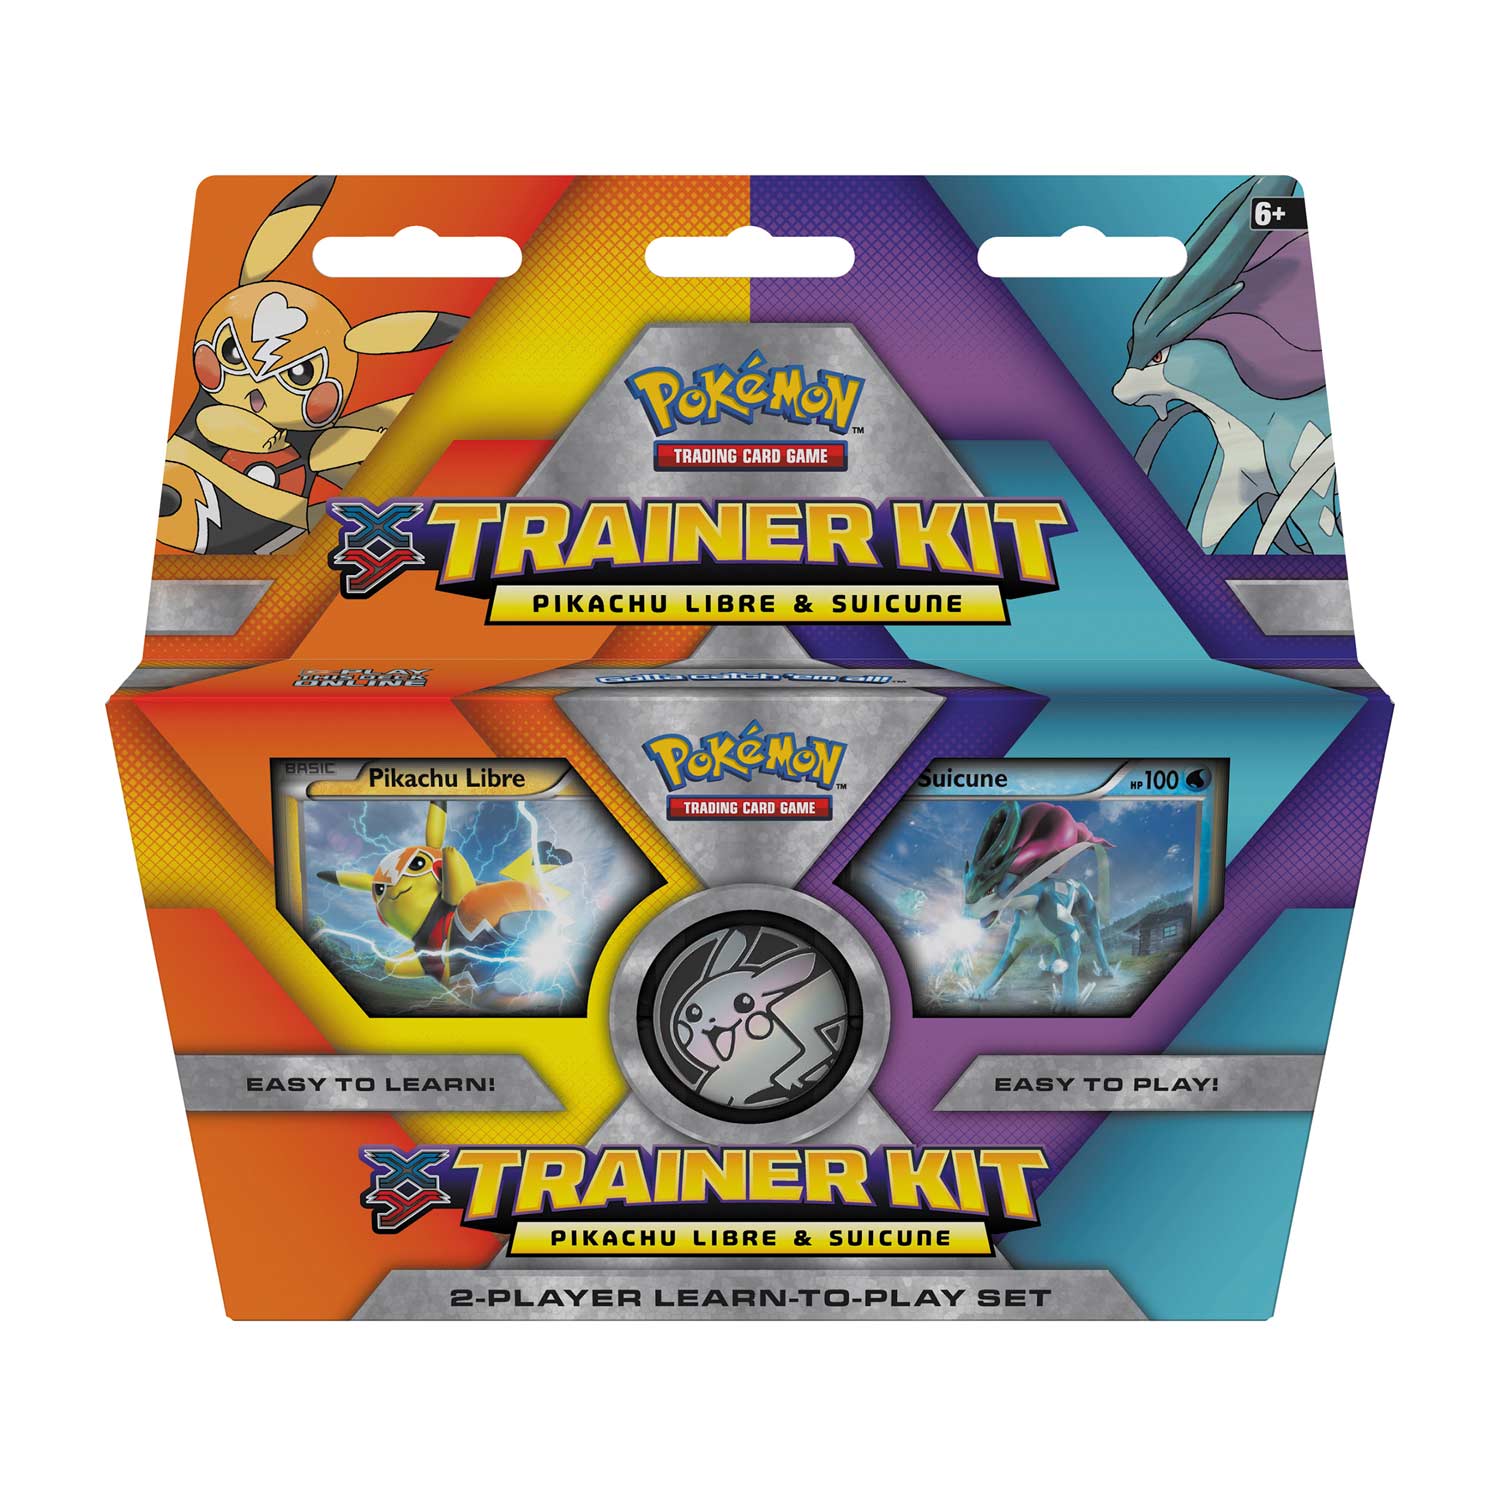 Pokémon TCG XY Trainer Kit—Pikachu Libre and Suicune | Starter Set